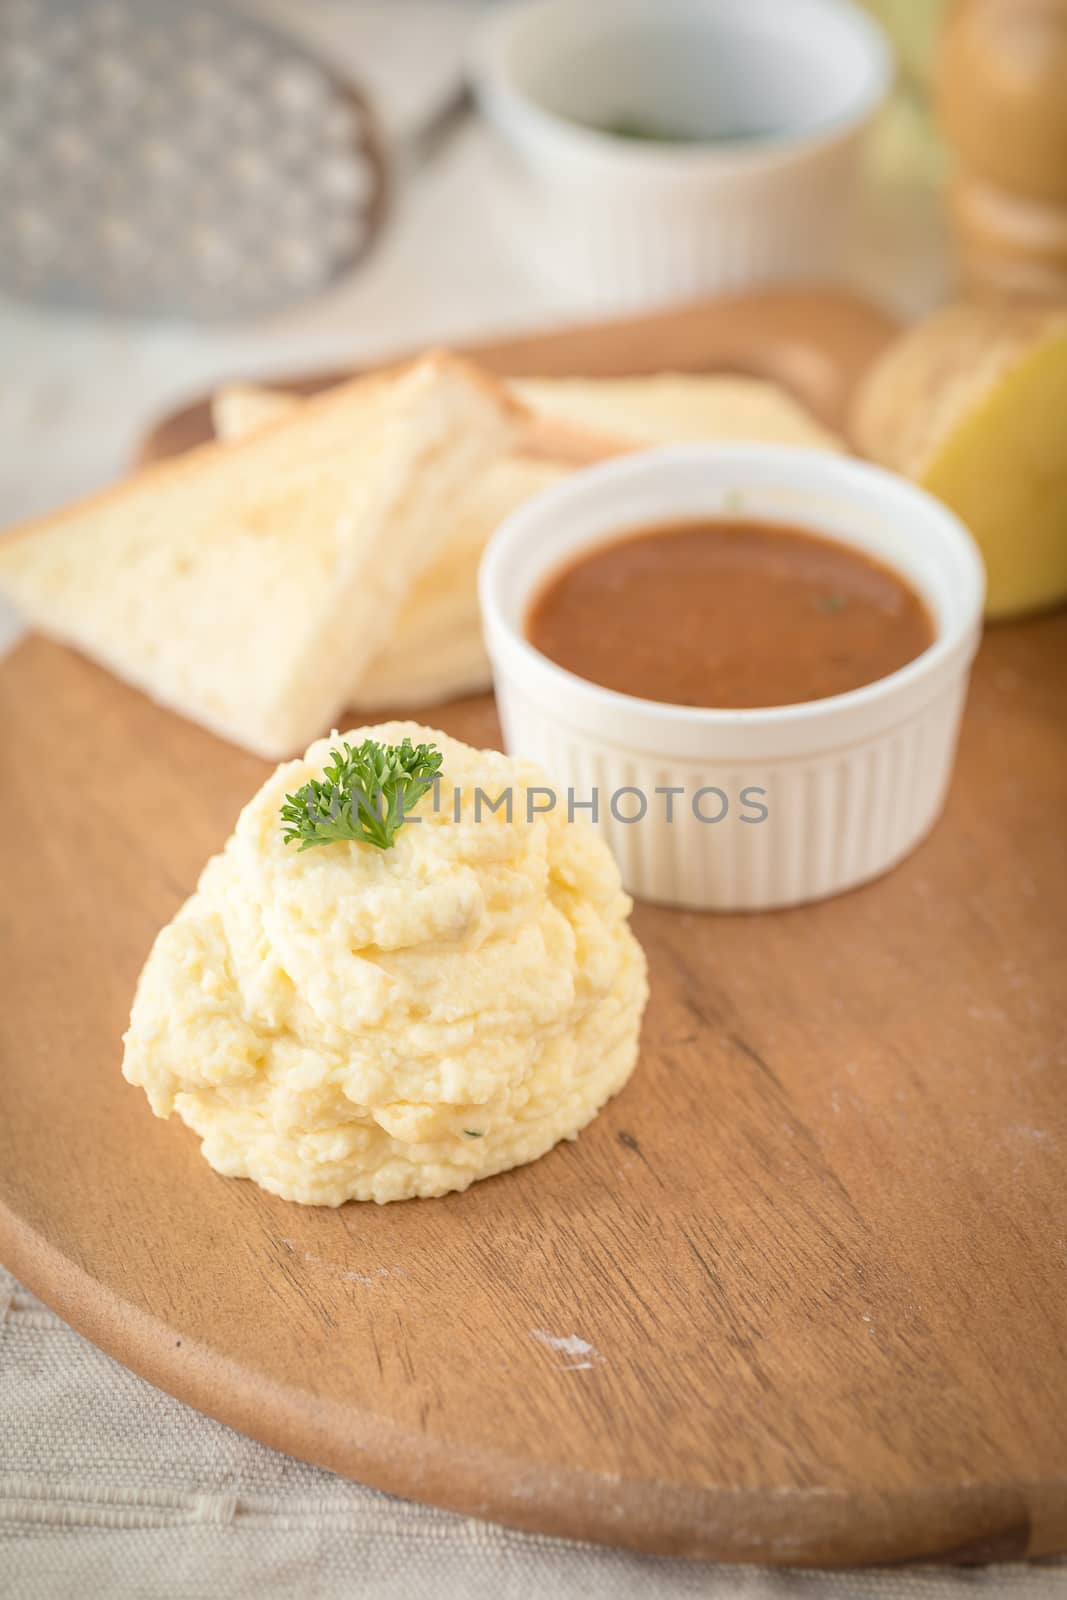 Mashed potatoes in a plate on a wooden table by kaiskynet